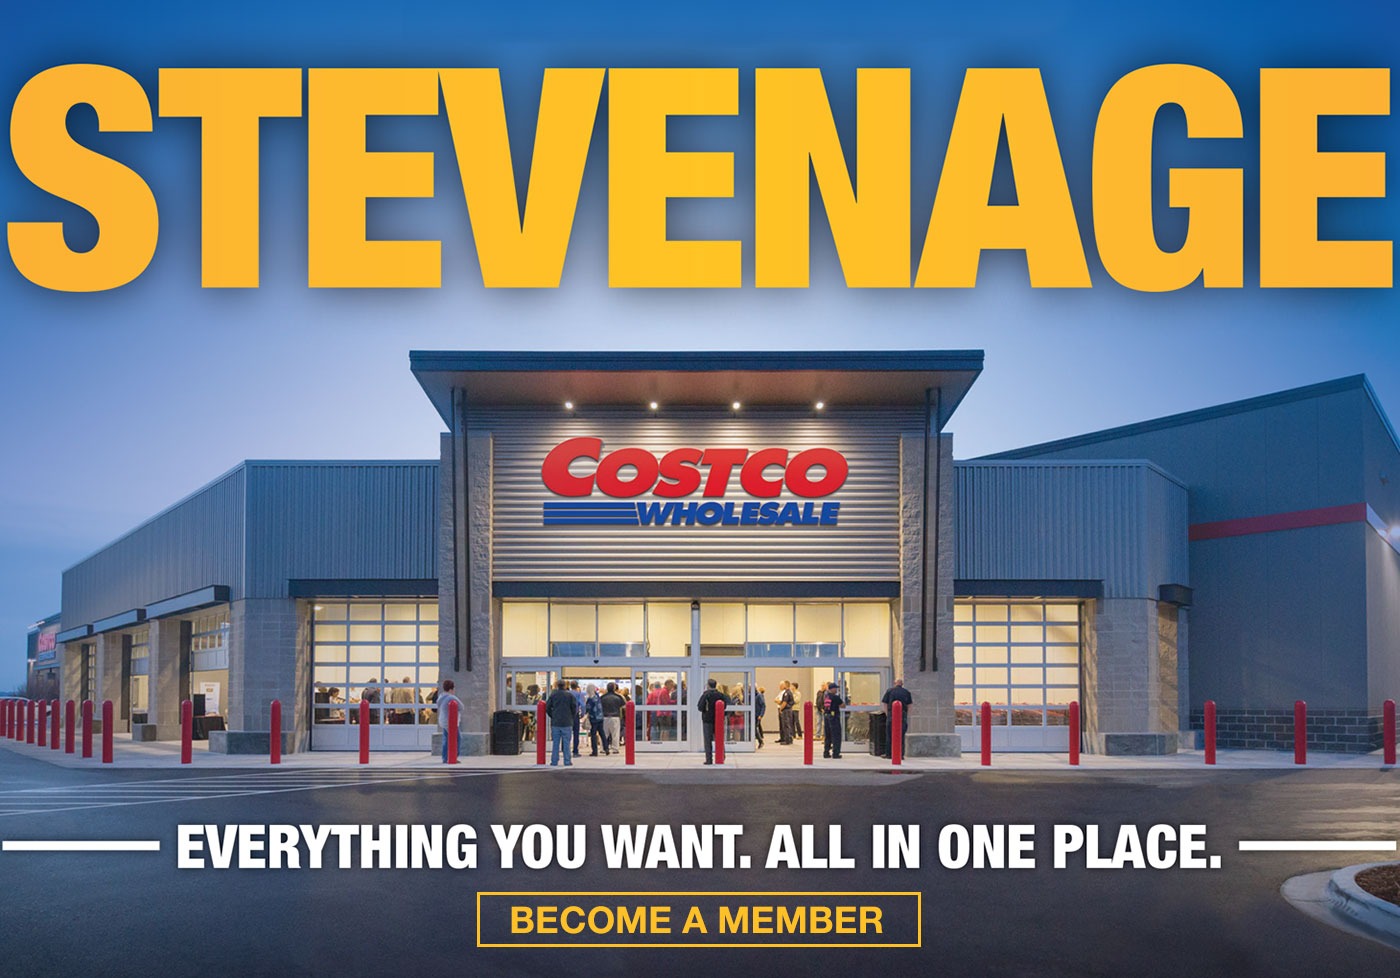 We are opening soon in Stevenage! Learn more